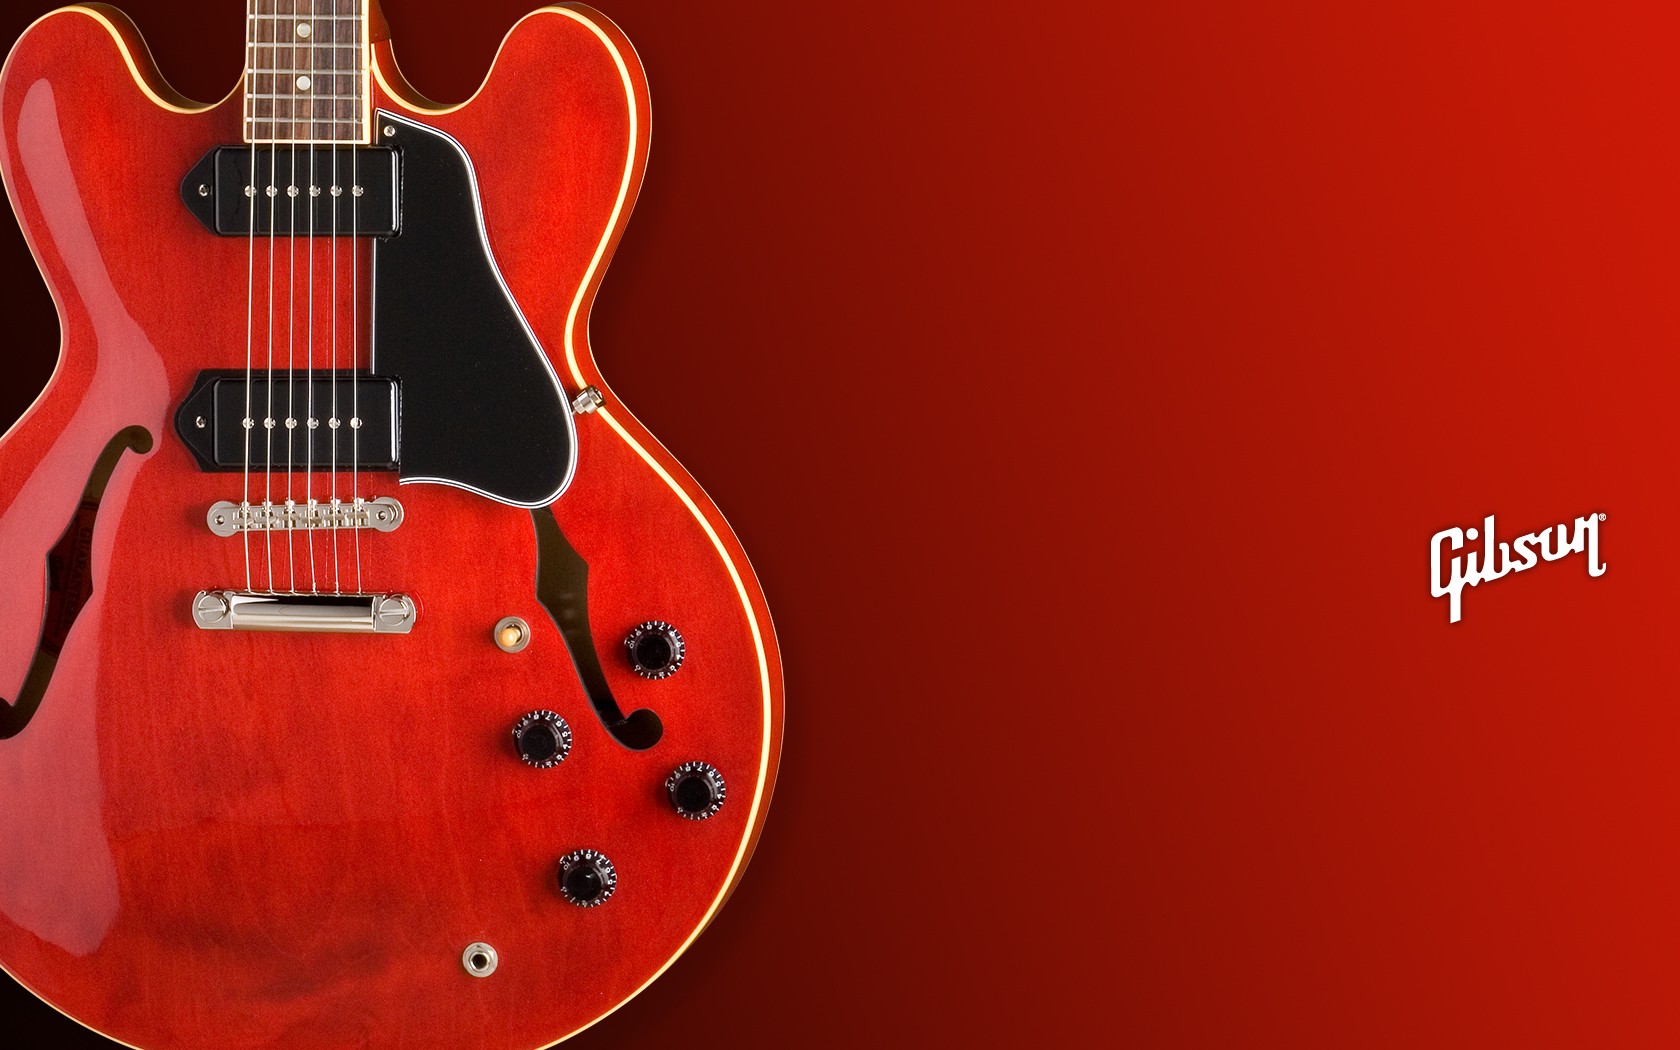 General 1680x1050 guitar Gibson ES335 musical instrument red background red